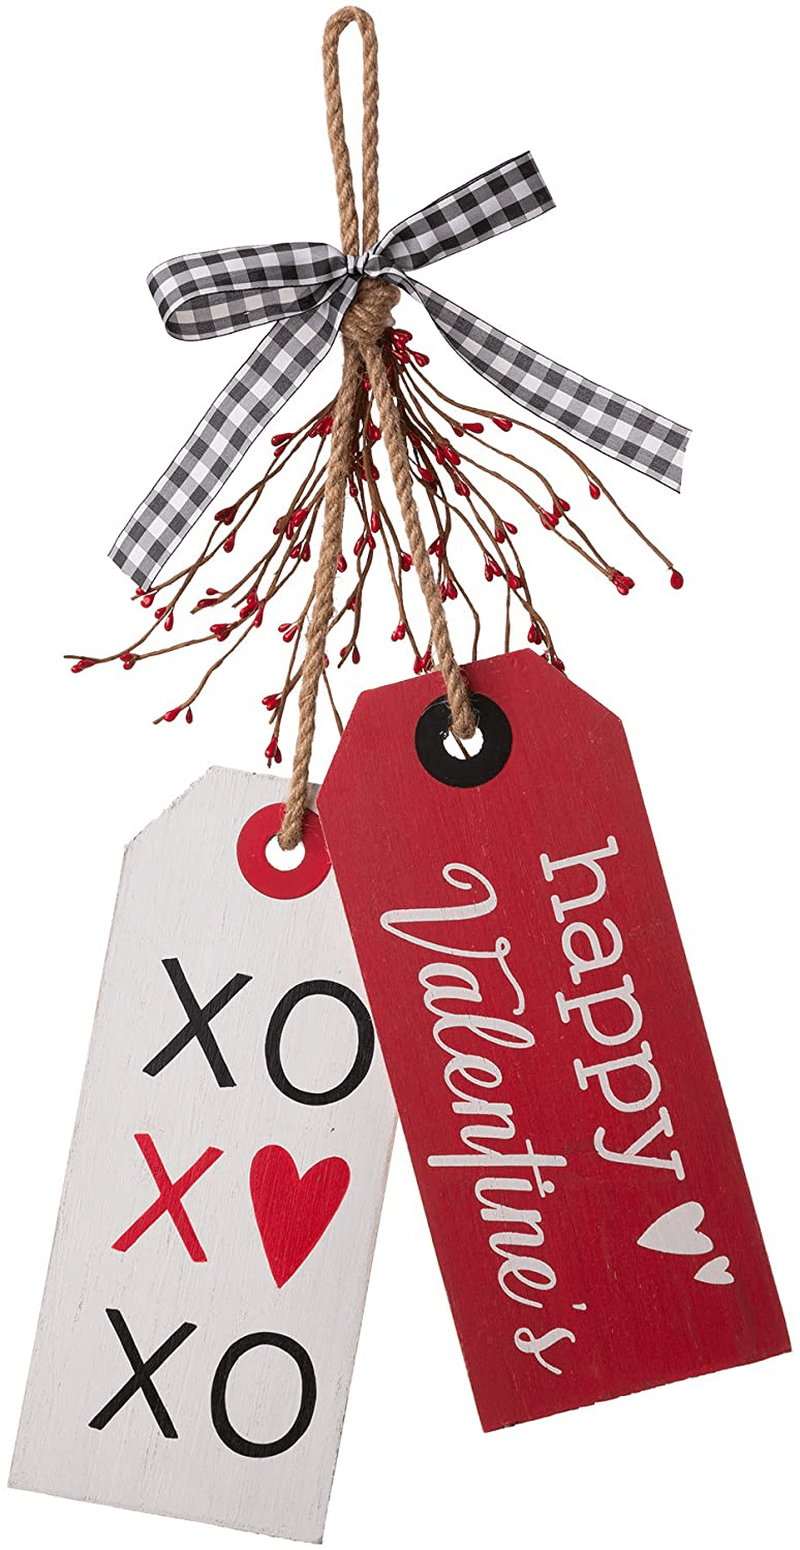 Valentine’S Day Hanging Wreath & Doorknob Decorations Wooden Painted Door Ornament Indoor/Outdoor Featured Red Berry Farmhouse Romantic Gift Home & Garden > Decor > Seasonal & Holiday Decorations eUty Valentine's Decor  